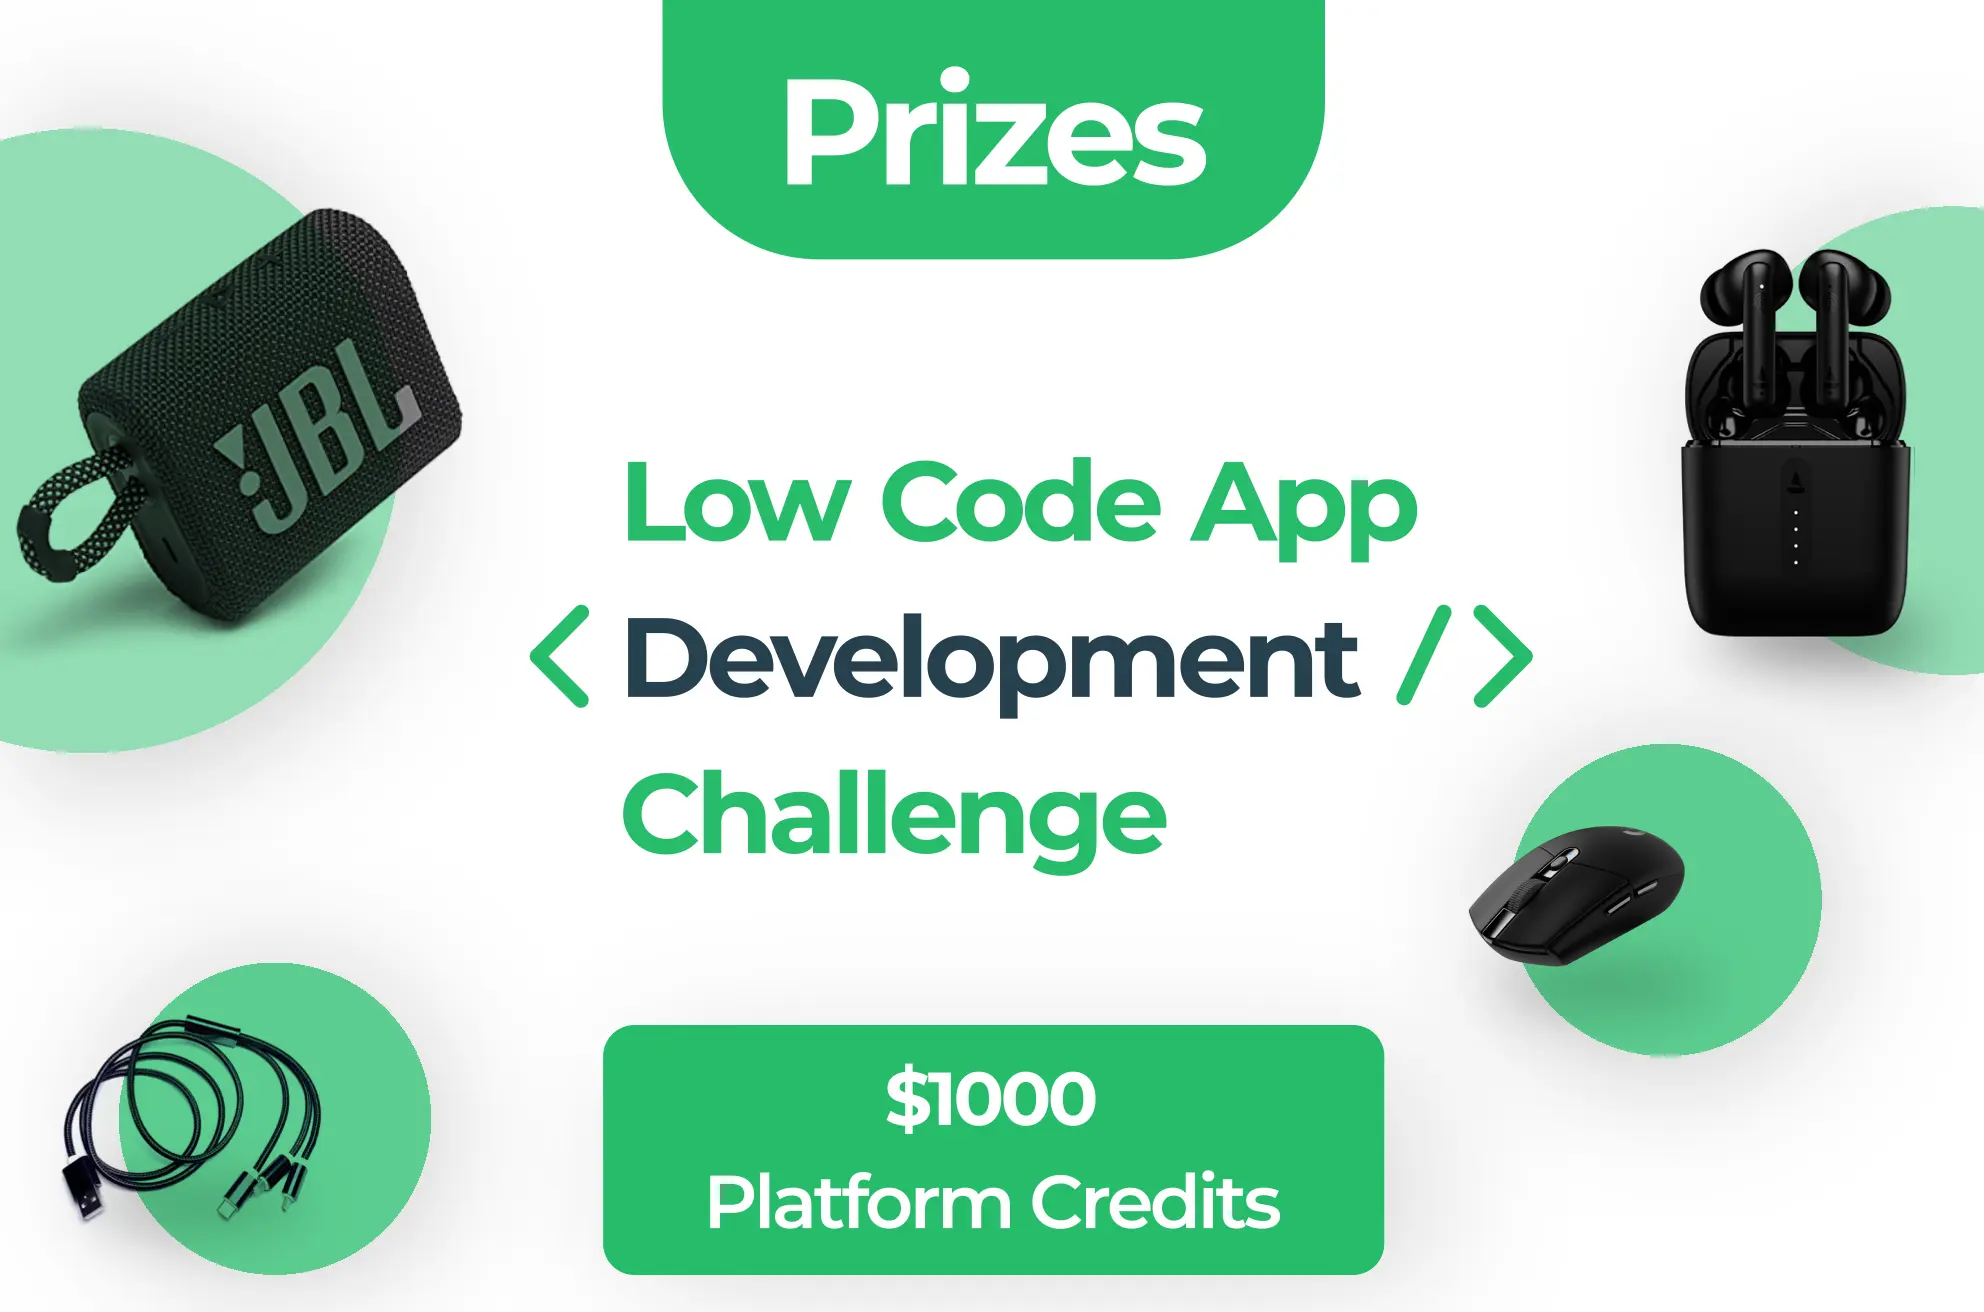 Win big with the DronaHQ app developement challenge